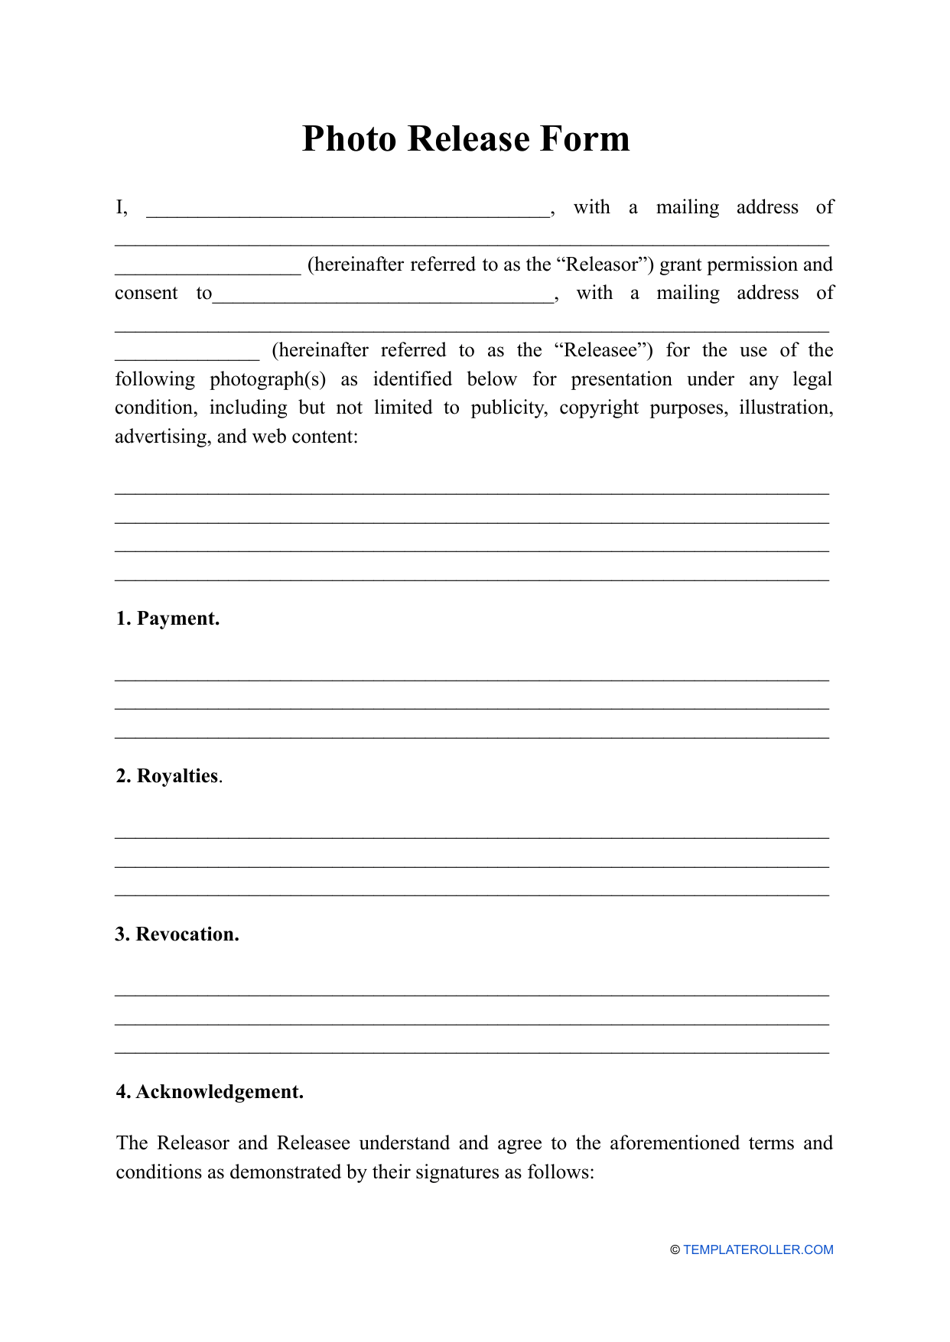 Photo Release Form, Page 1